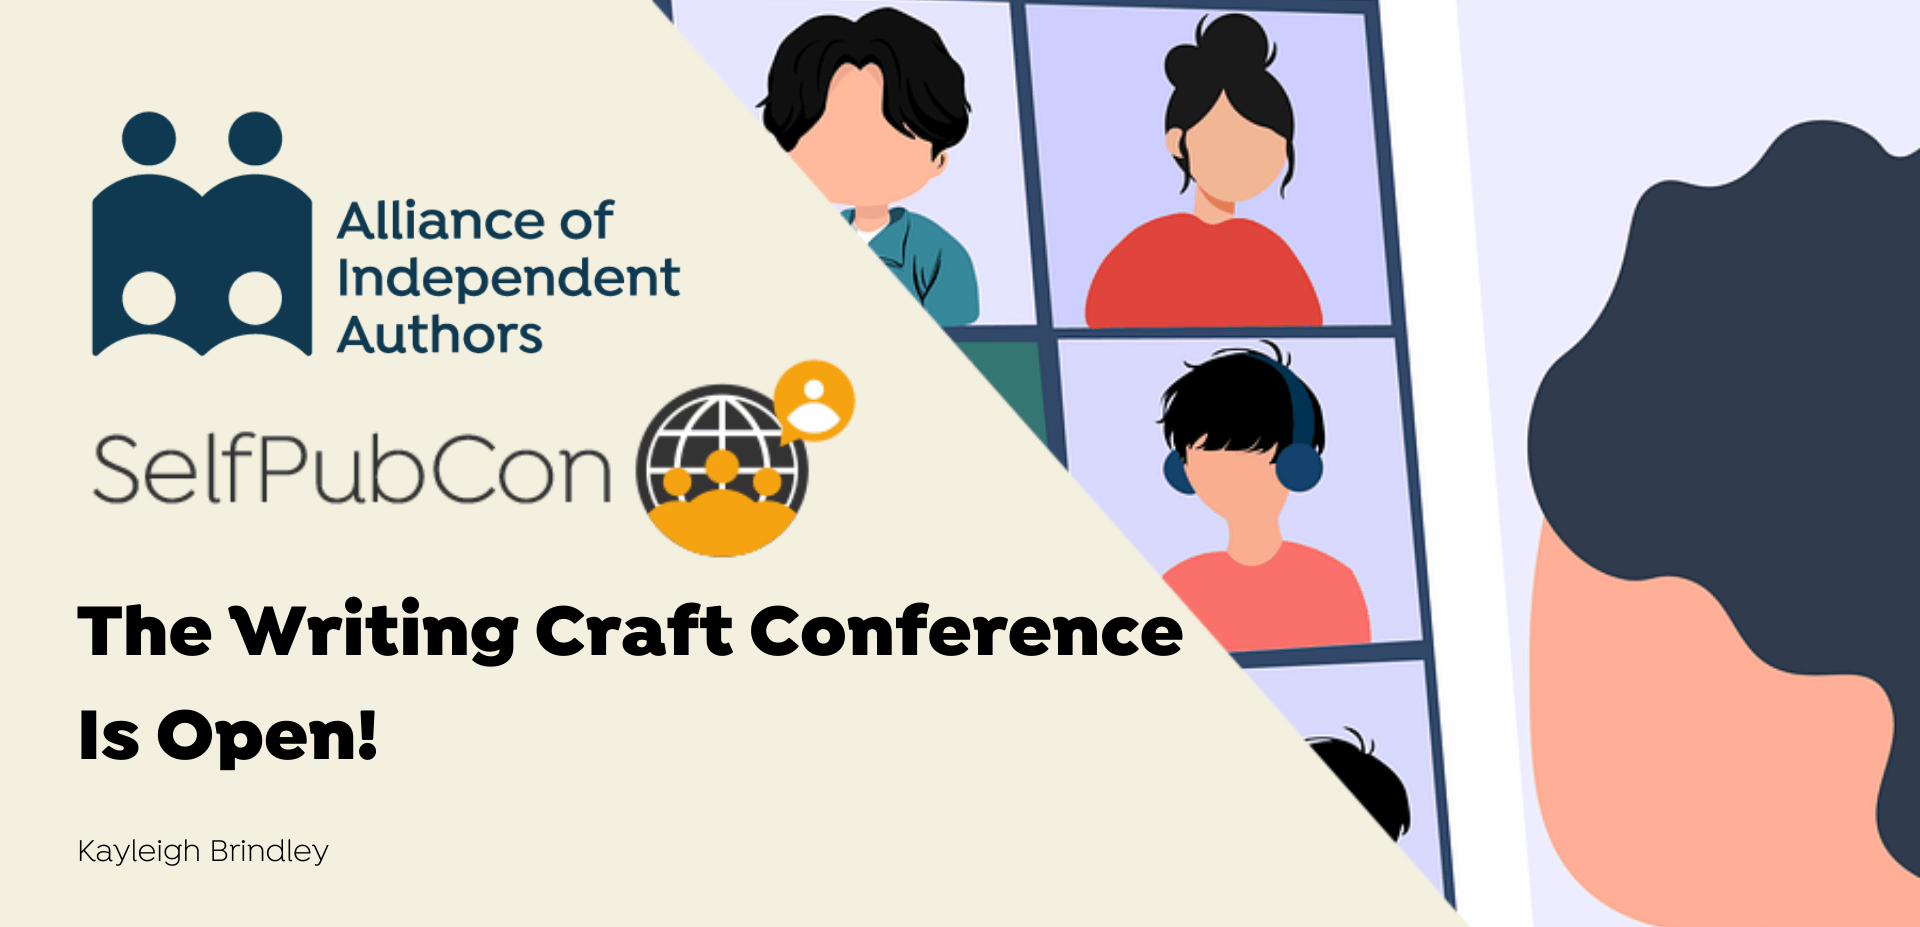 The Writing Craft Conference Is Open!